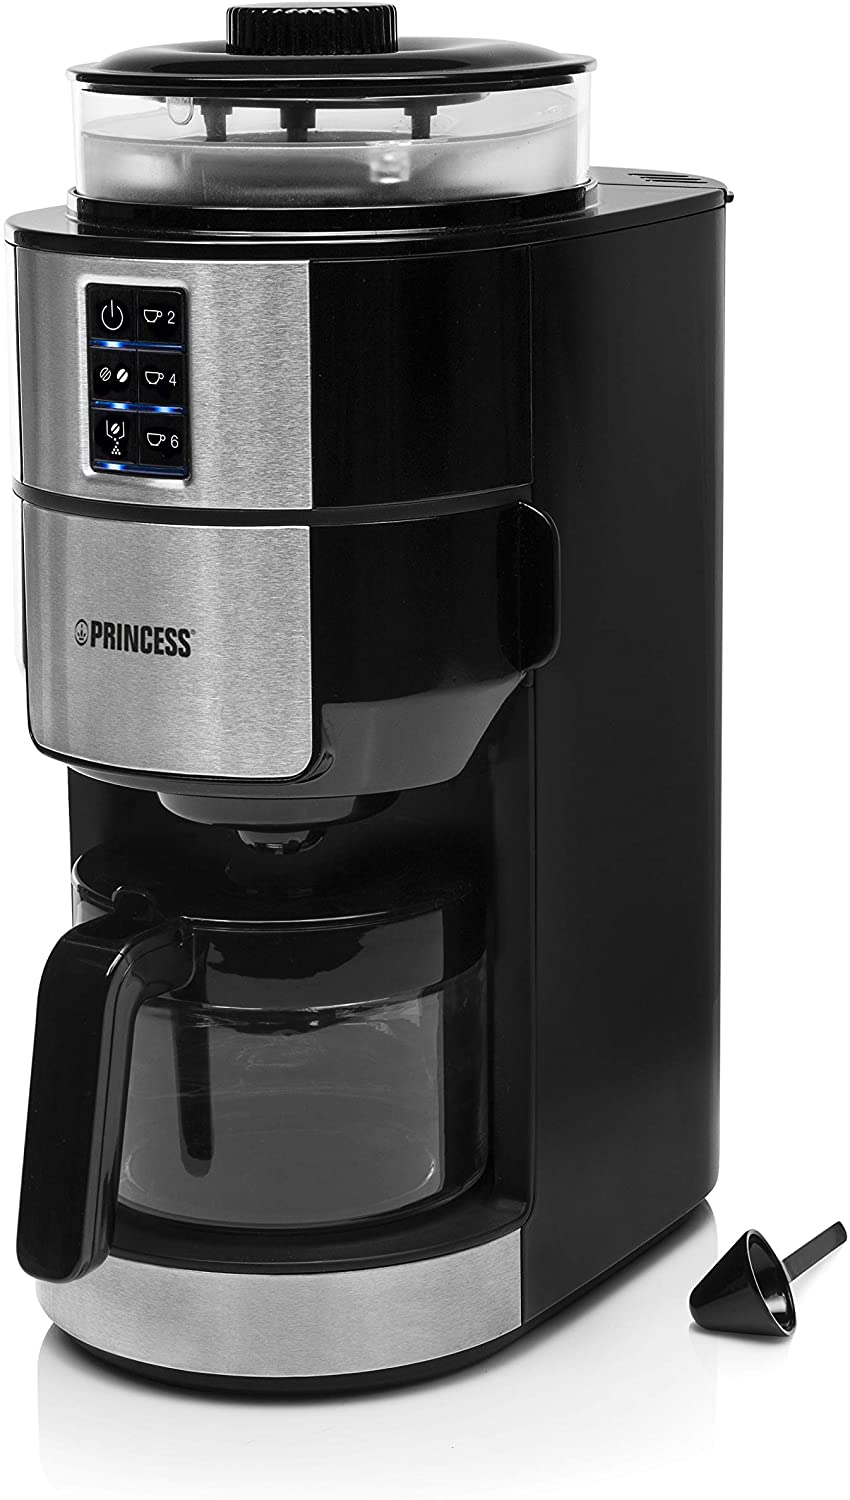 Princess 249408 Grind & Brew Compact Coffee Machine with Integrated Grinder